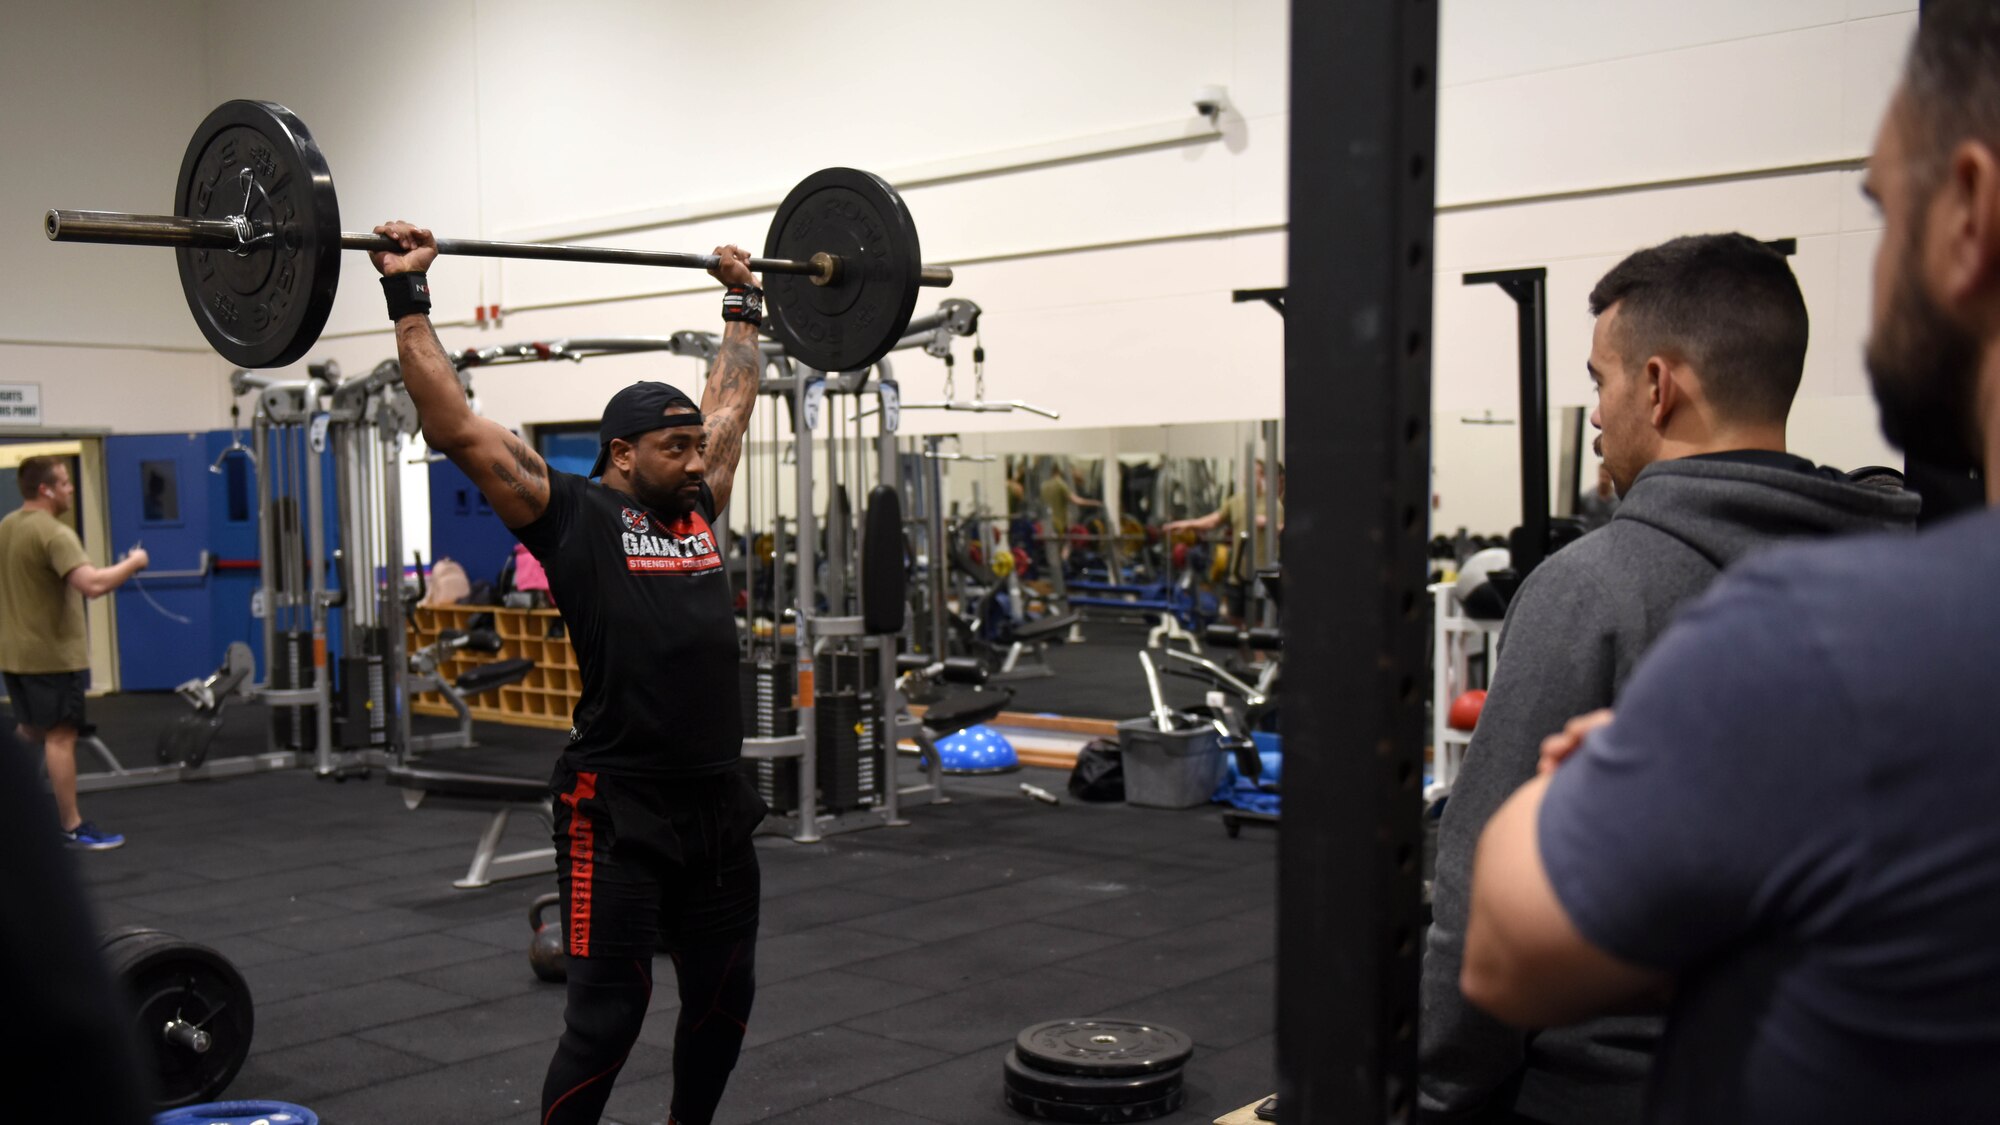 Staff Sgt. Corey Bryant, 39th Security Forces Squadron vault storage area supervisor, demonstrates a lift during his fitness class, at Incirlik Air Base, Turkey, Feb. 6, 2020.